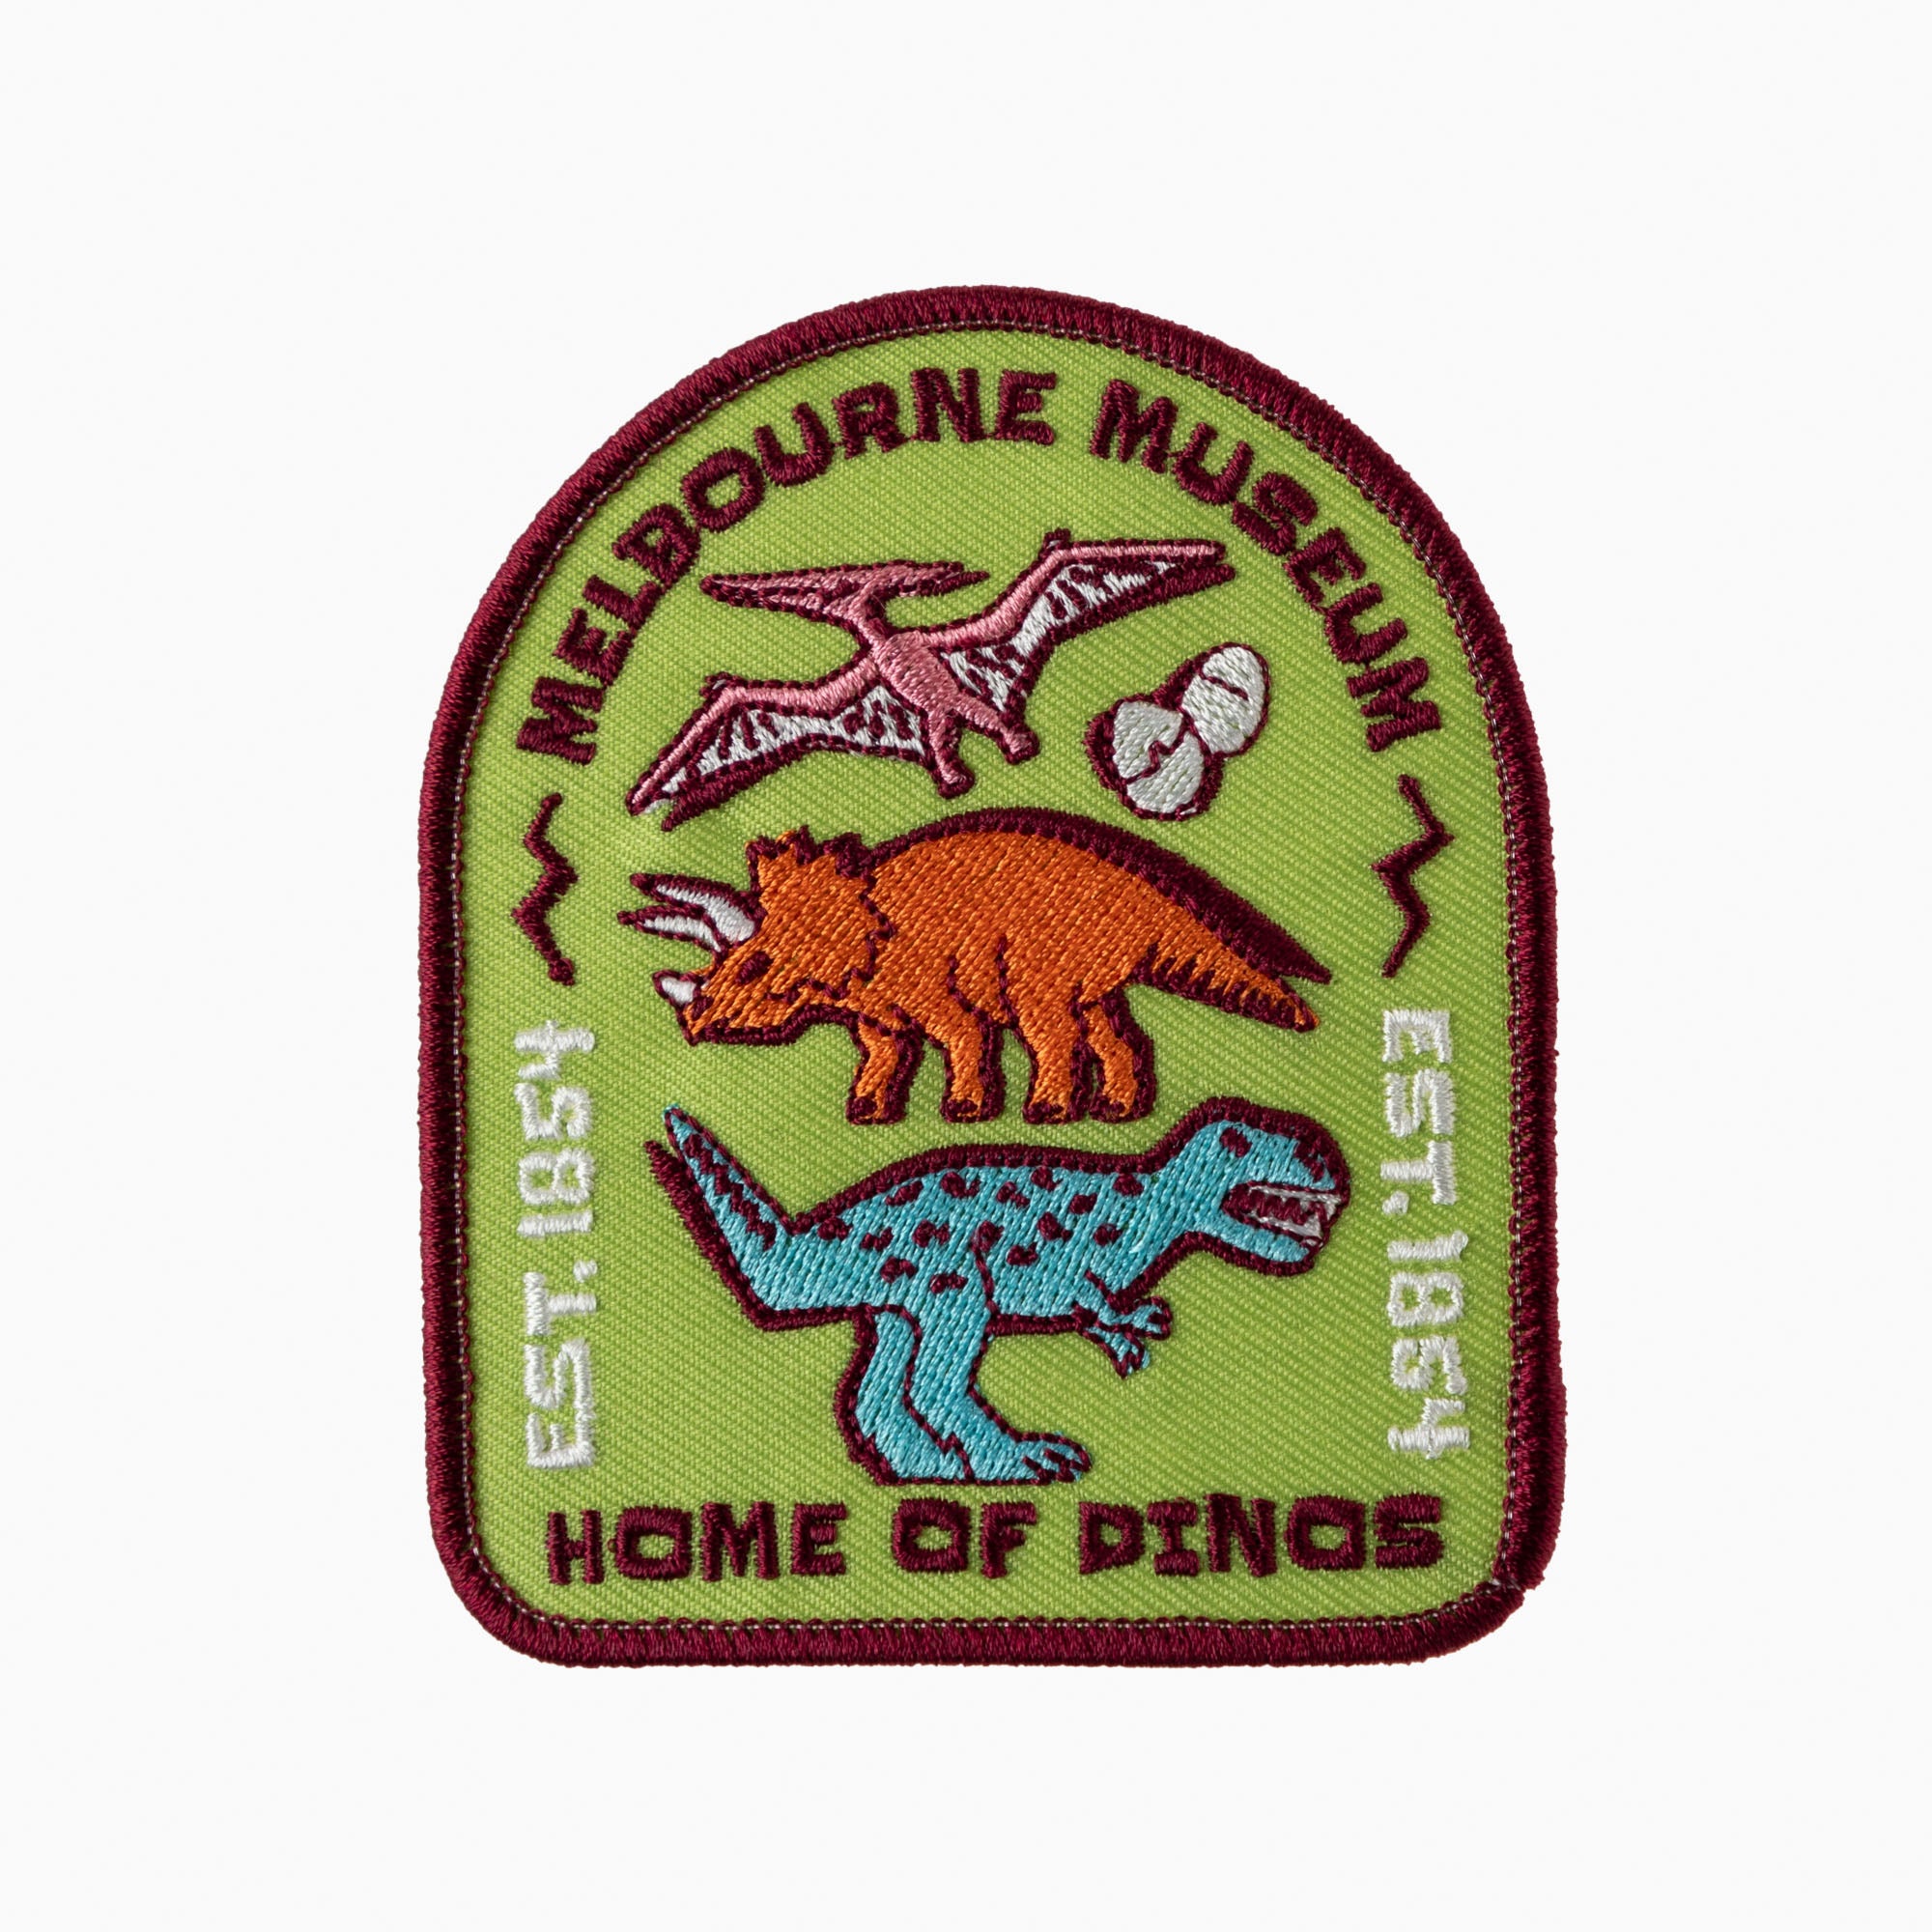 Home of Dinos Patches